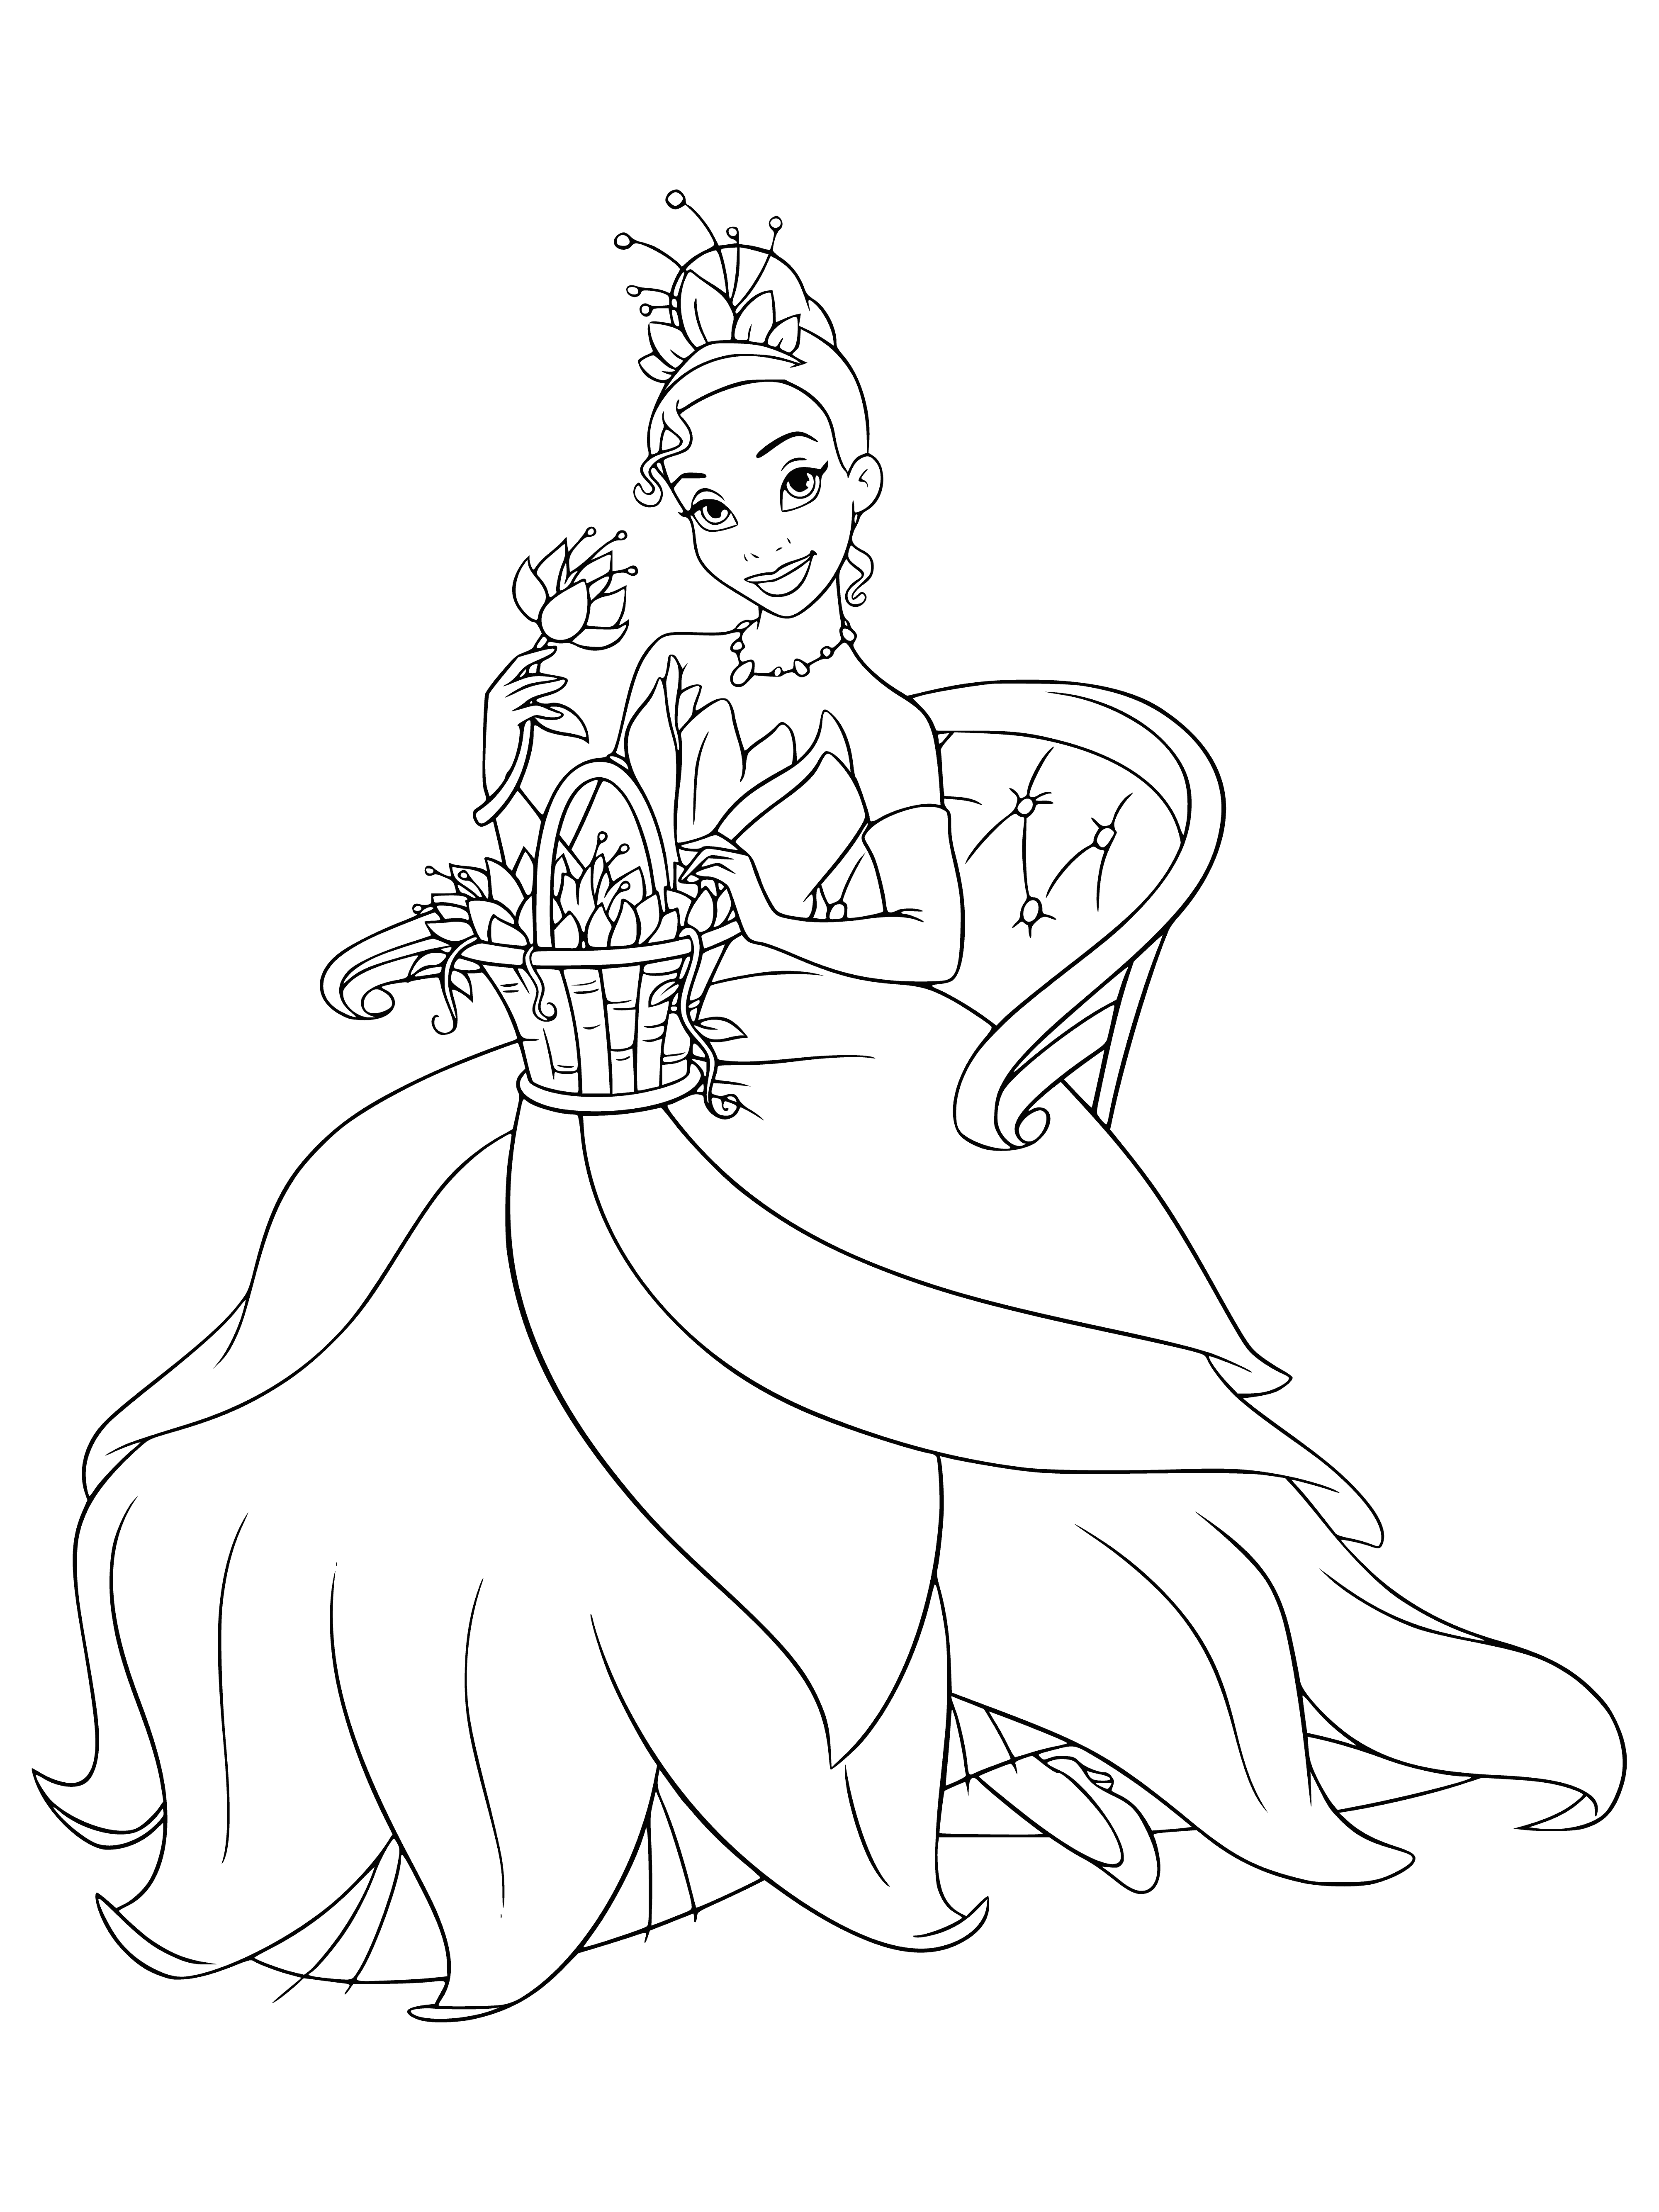 coloring page: Beautiful princess holding a bouquet of flowers stands in a field, with a castle on a hill in the background. She wears a white dress and a purple cloak. #princess